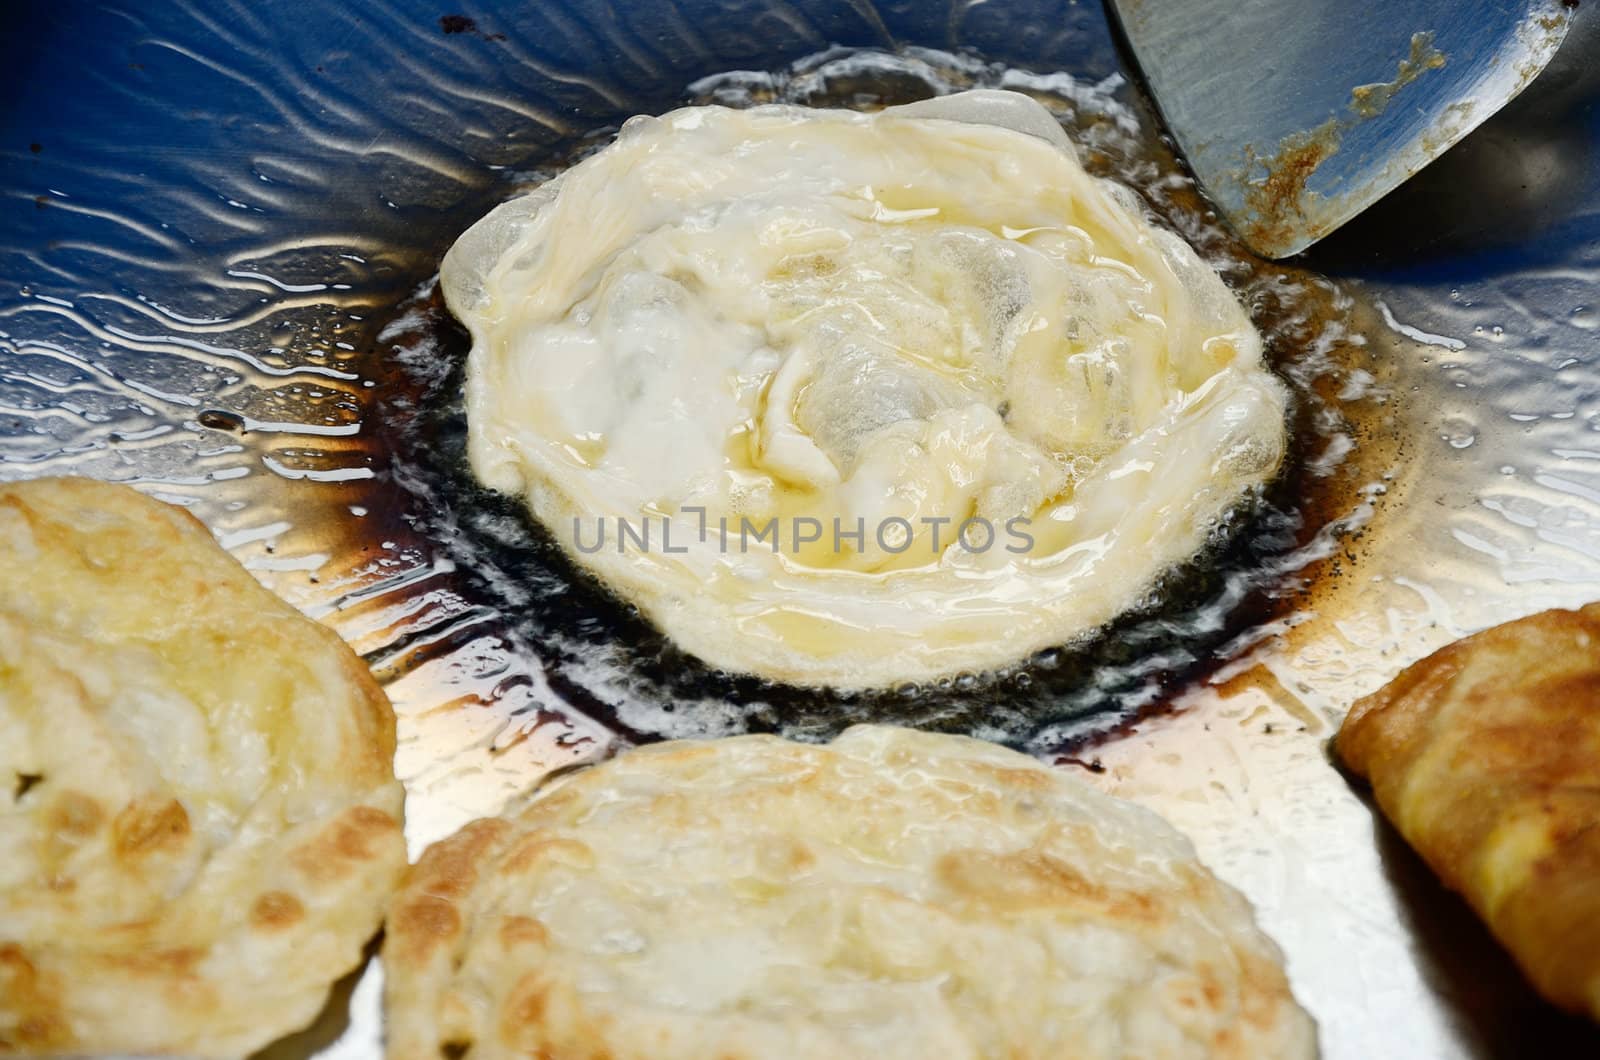 Roti or pancakes fring in some clarified butter